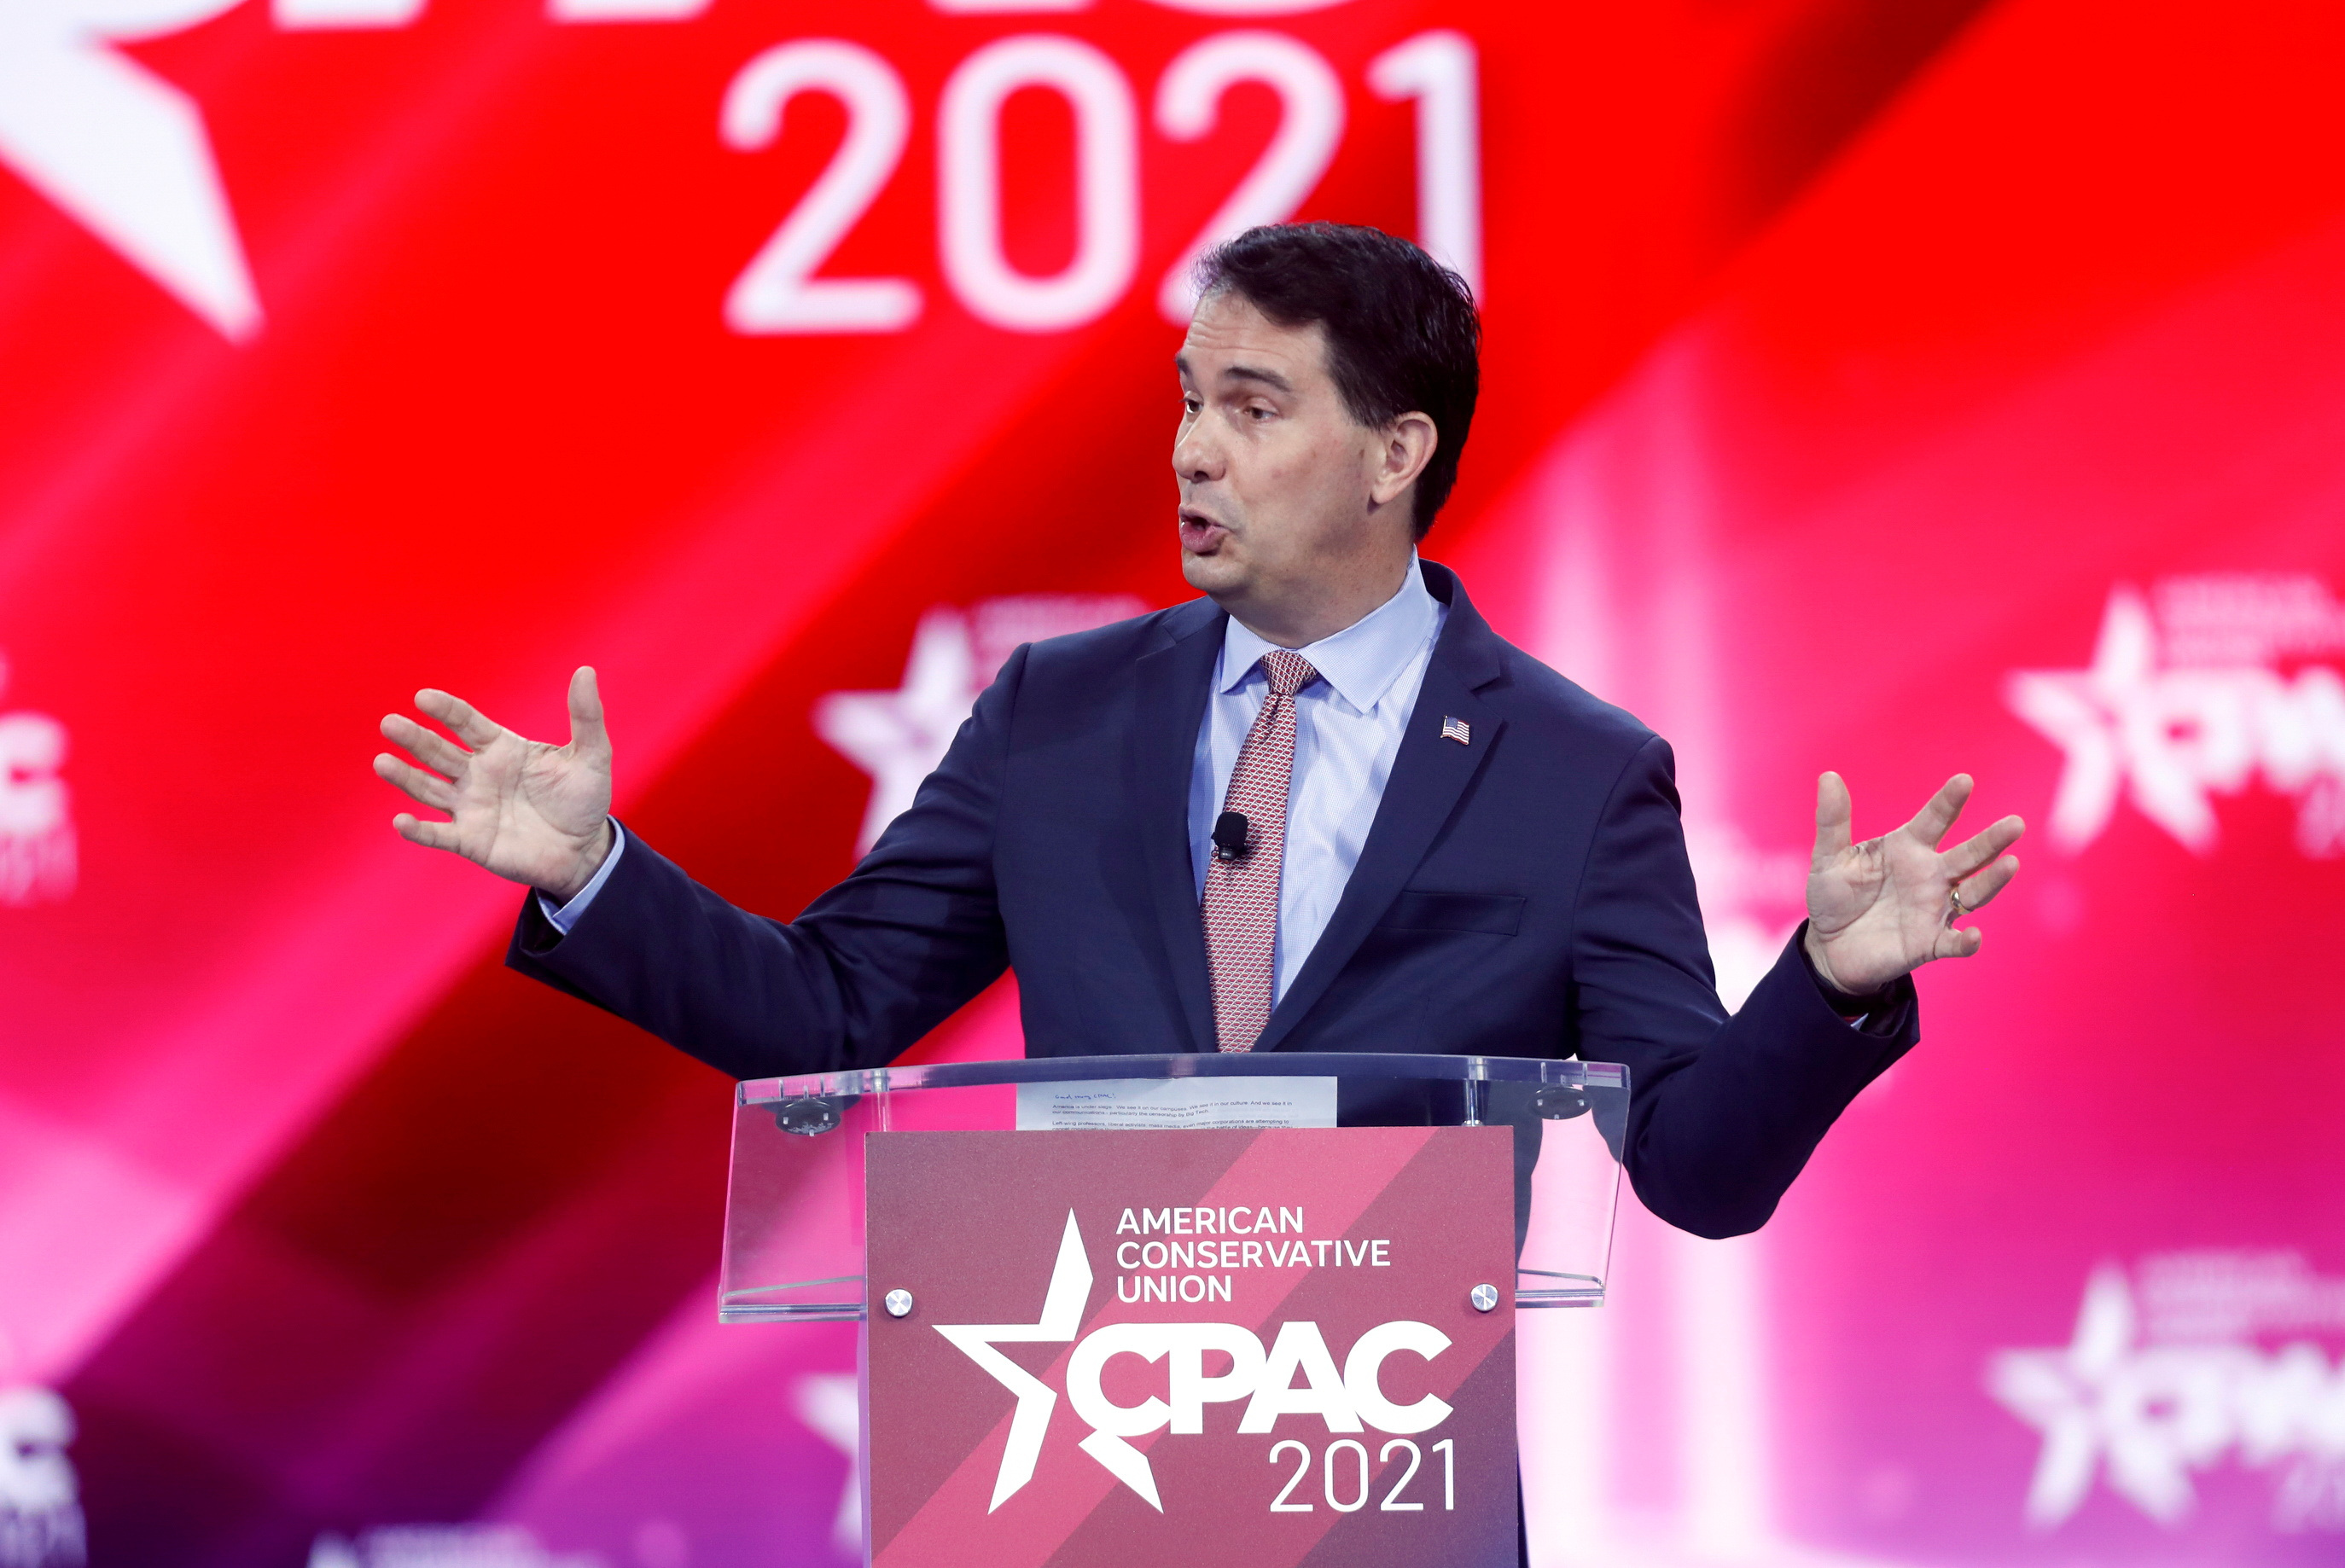 Conservative Political Action Conference (CPAC) in Orlando